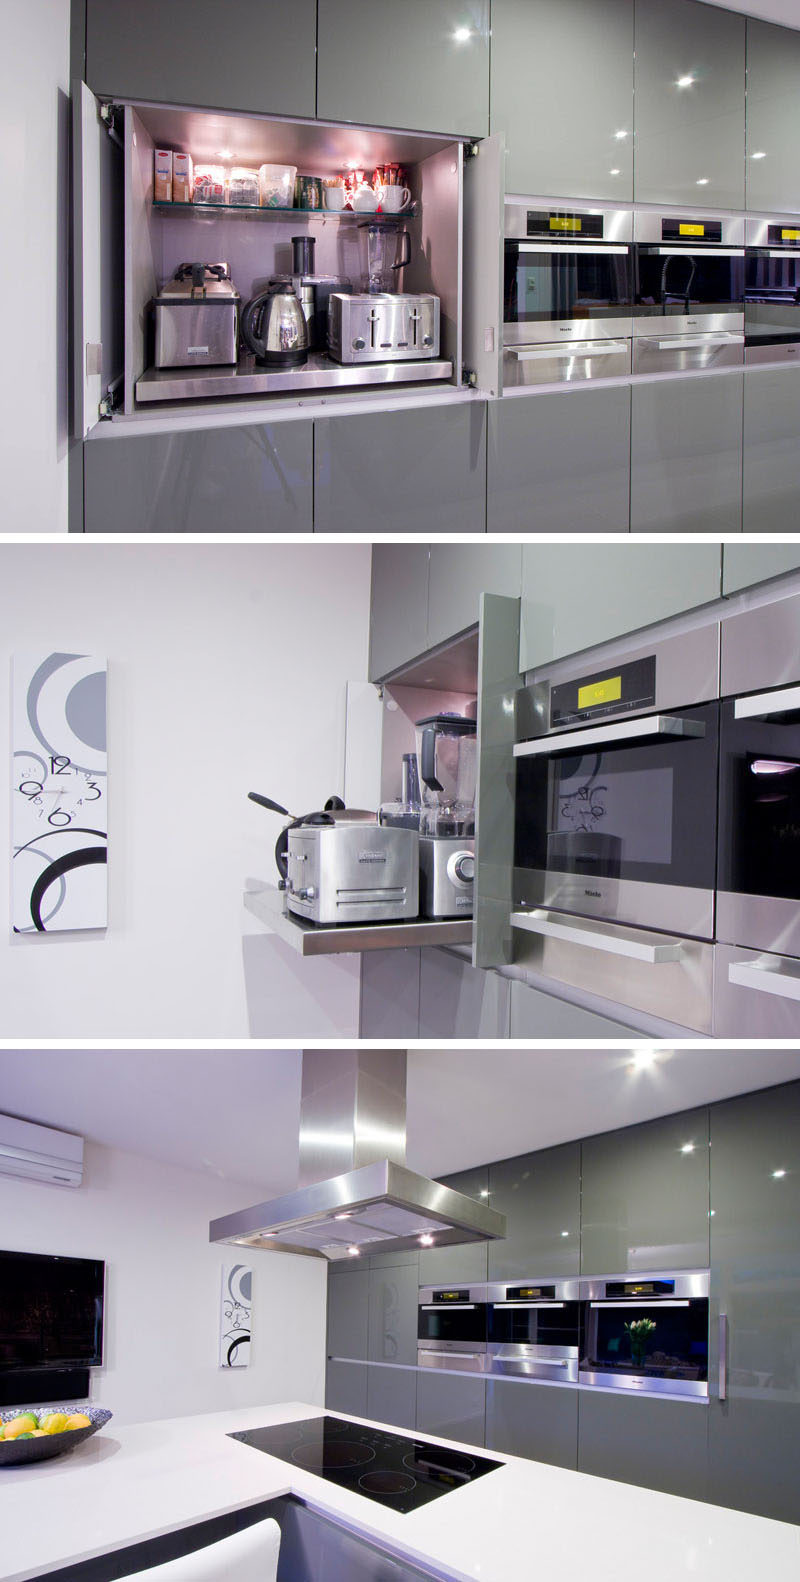 Kitchen Design Idea - Store Your Kitchen Appliances In A Dedicated Appliance Garage // The main shelf of this appliance garage pulls out to make it easier to access the appliances stored at the back.